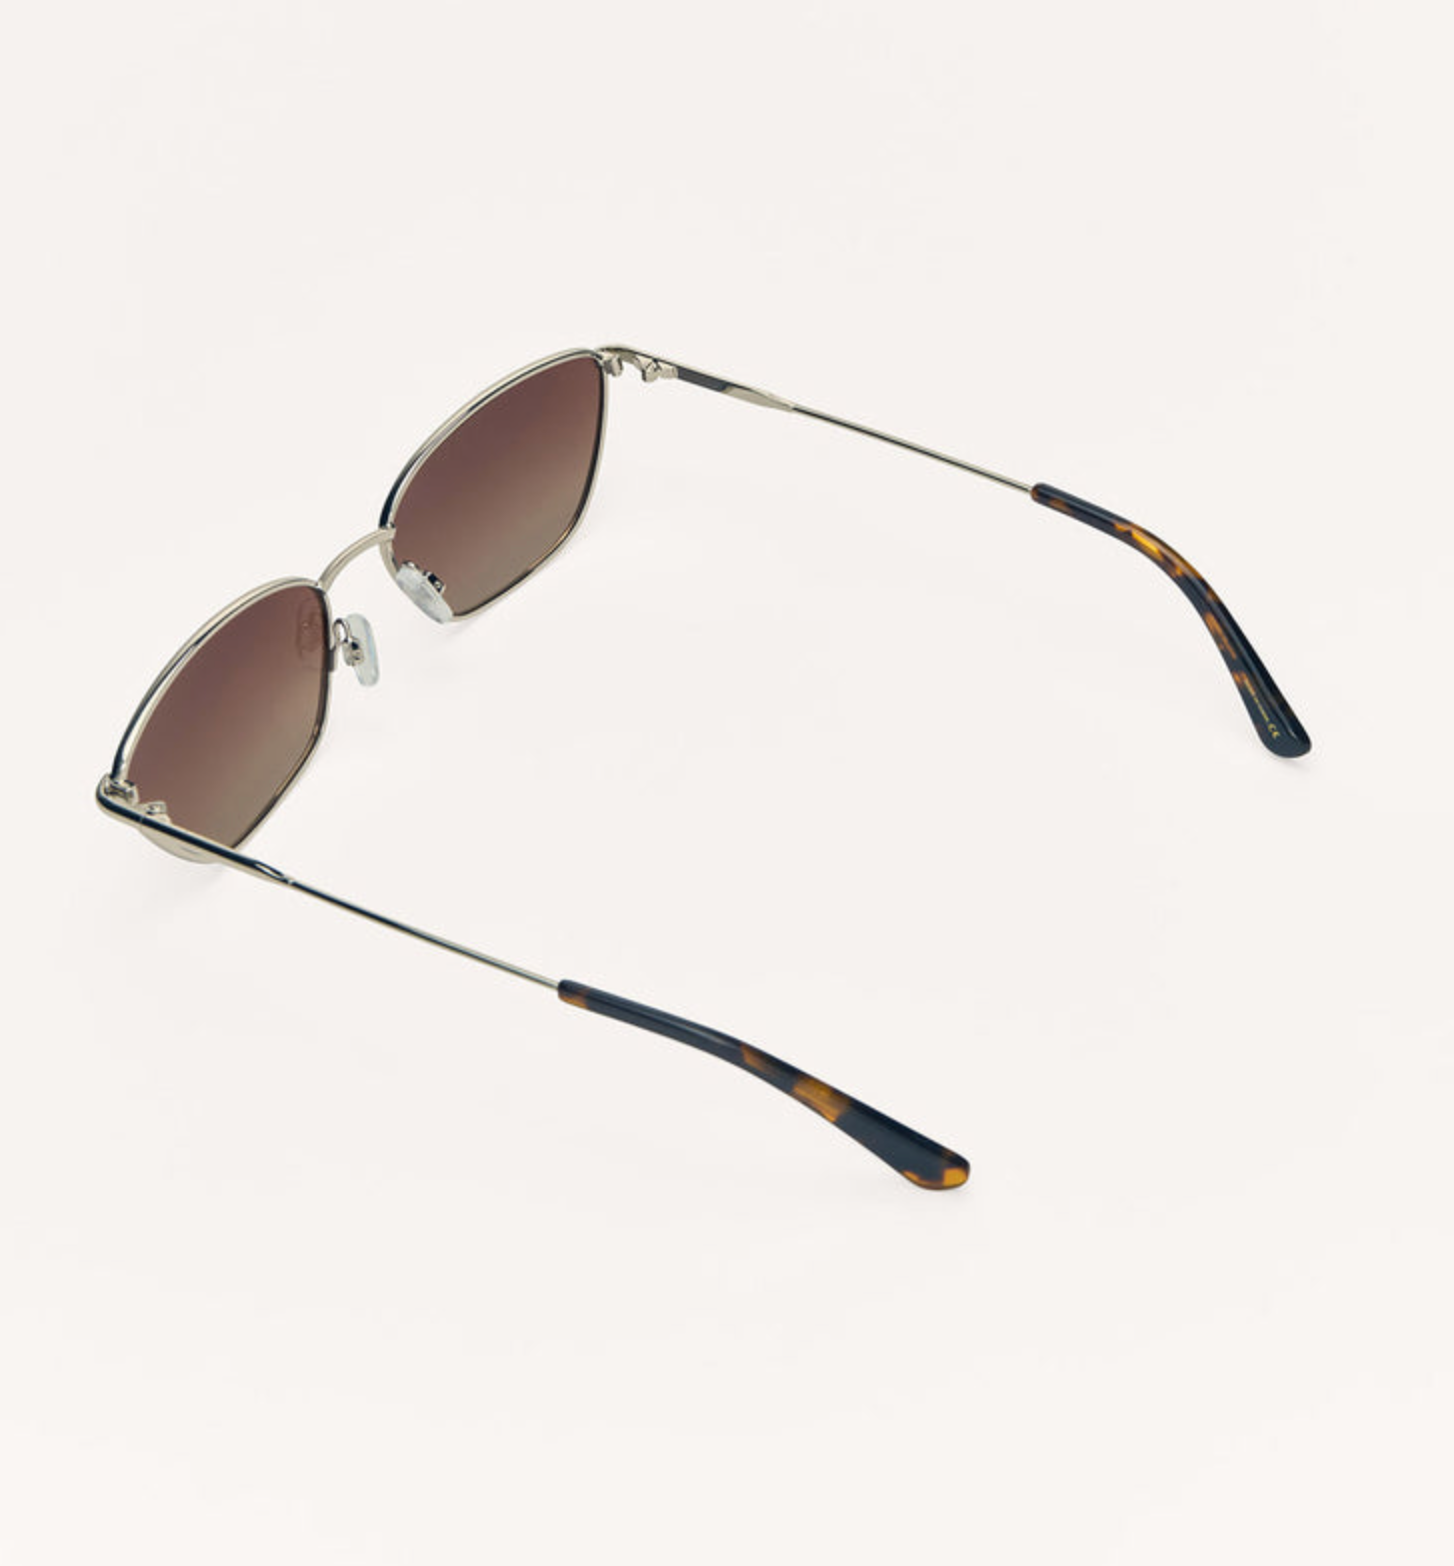 Catwalk Sunglasses by Z Supply, Silver-Brown